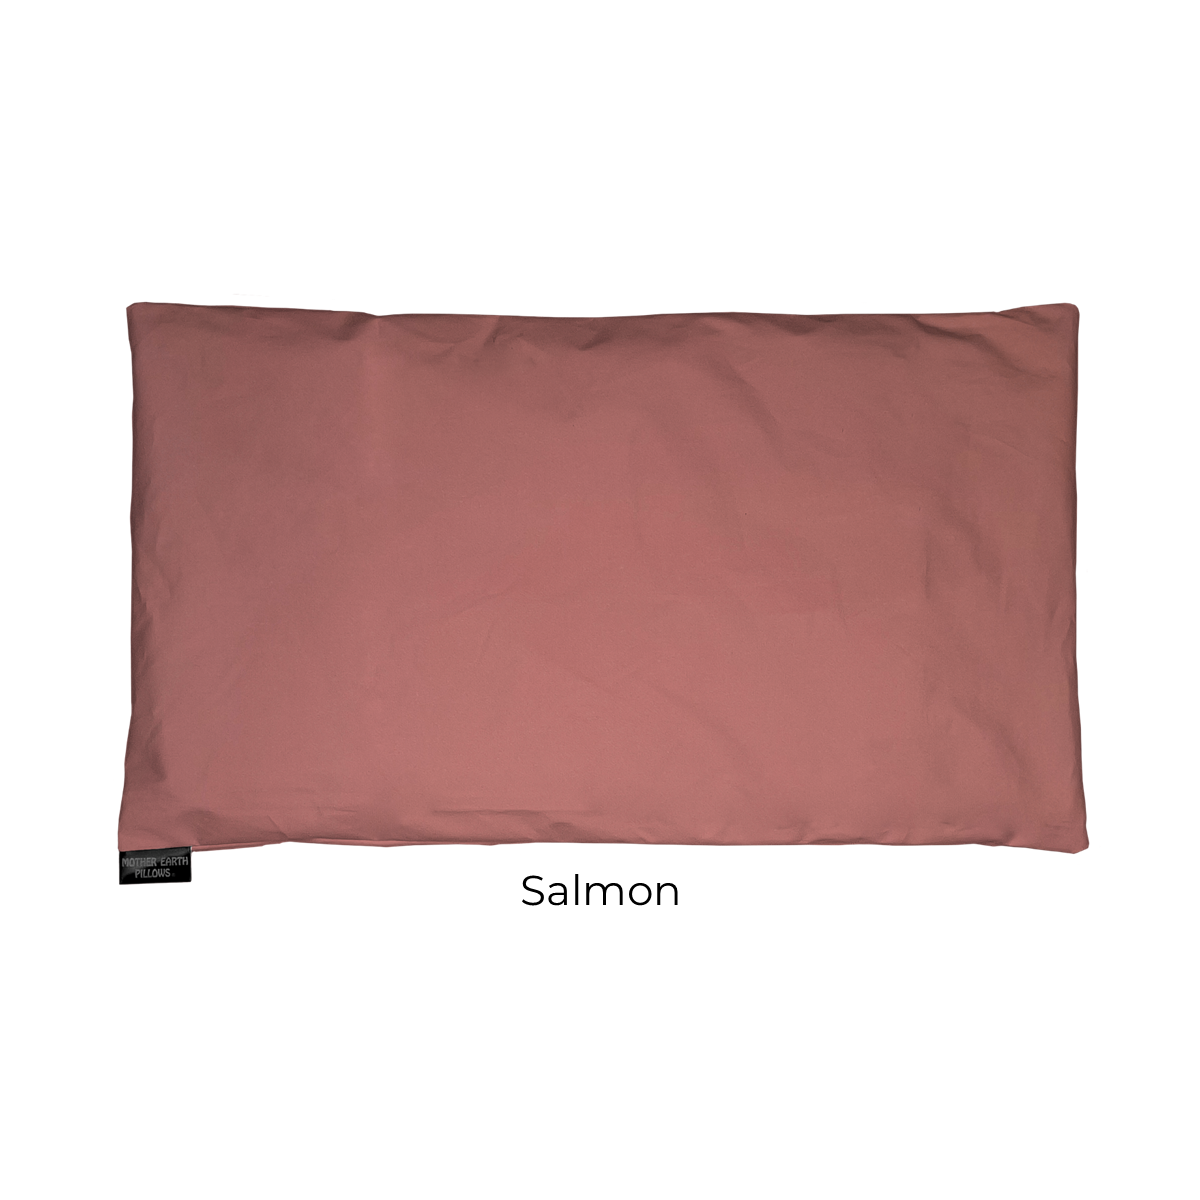 https://www.motherearthpillows.com/wp-content/uploads/2017/08/Large-Flax-Upload-Salmon.png